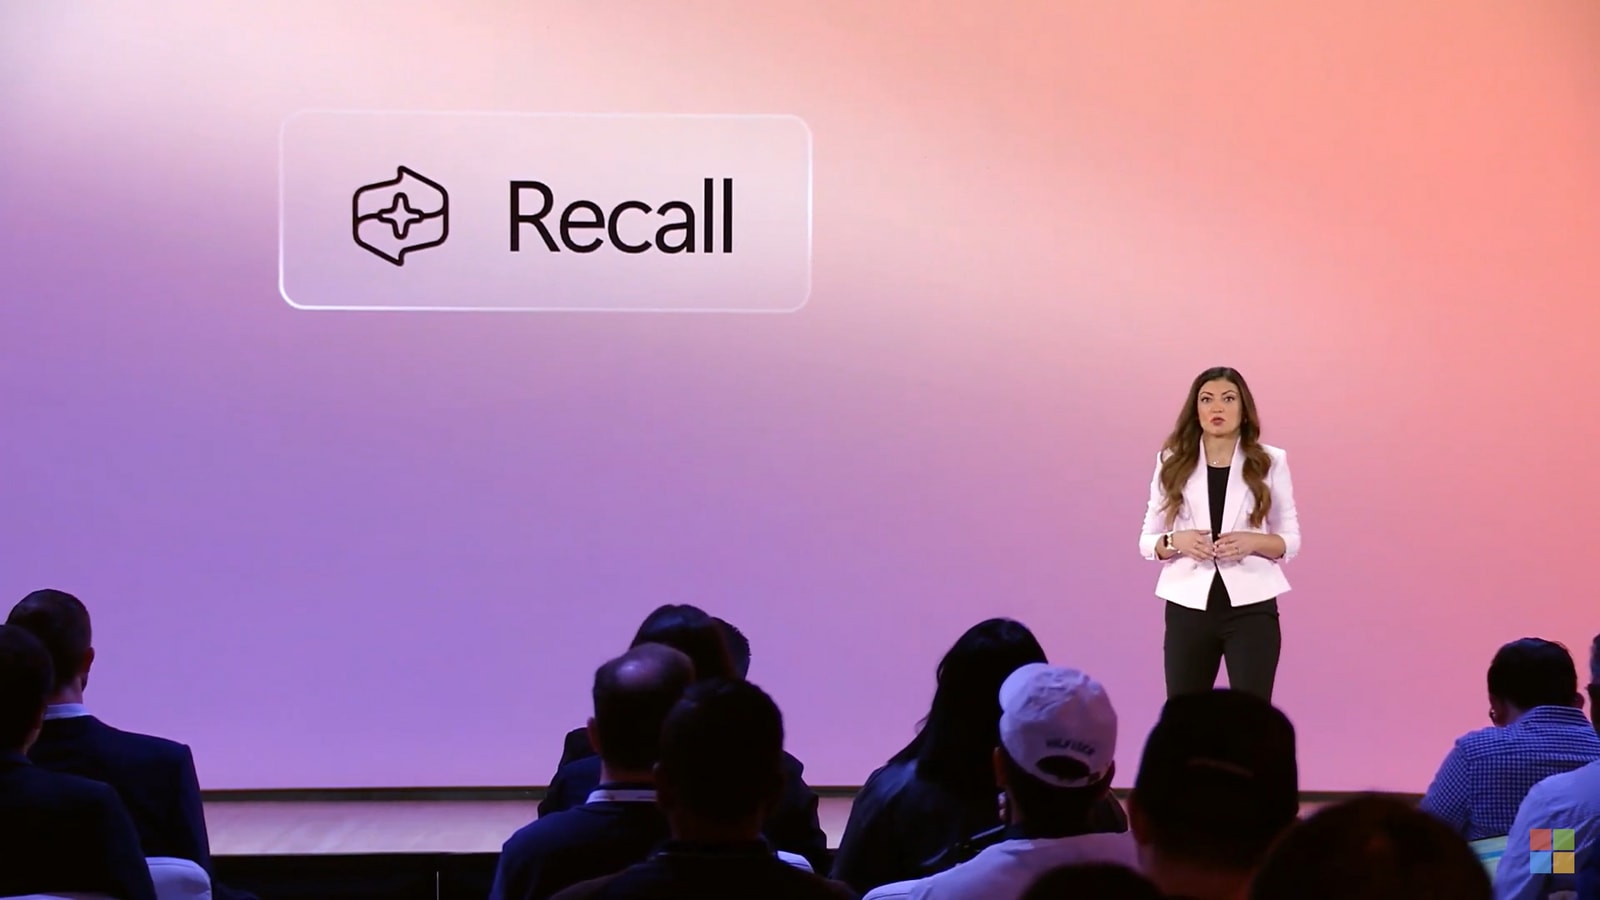 Microsoft introduces “Recall” which makes use of AI to look in Home windows: Know what it’s all about